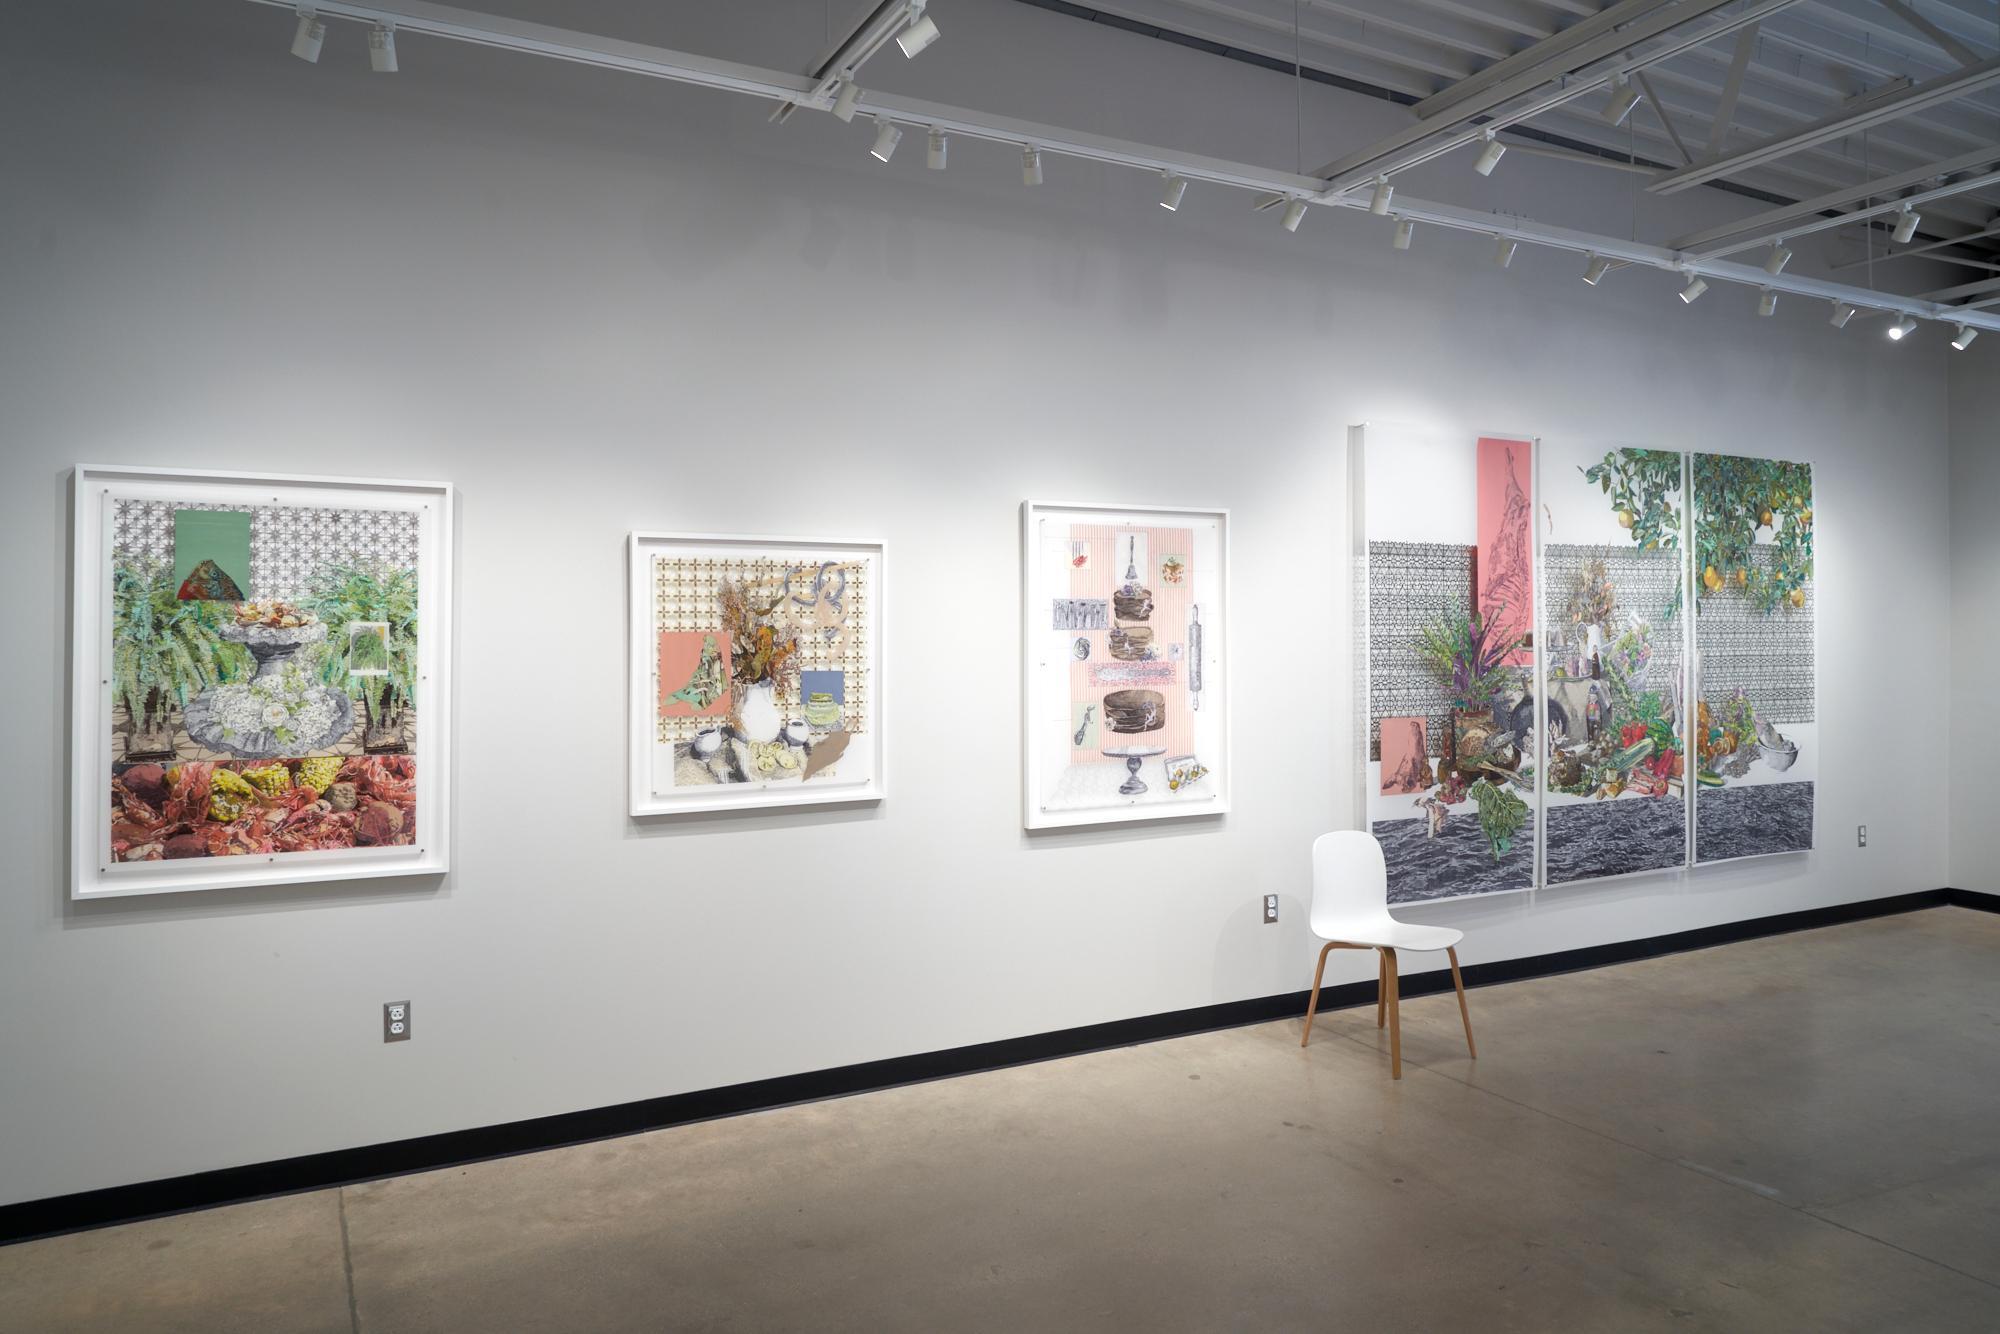 LAURA TANNER GRAHAM’s drawings and installations are often discussed as part of the Southern Gothic literary tradition, sharing similar themes with authors such as Flannery O’Connor and Eudora Welty. As a Georgia native, Graham’s work seeks to